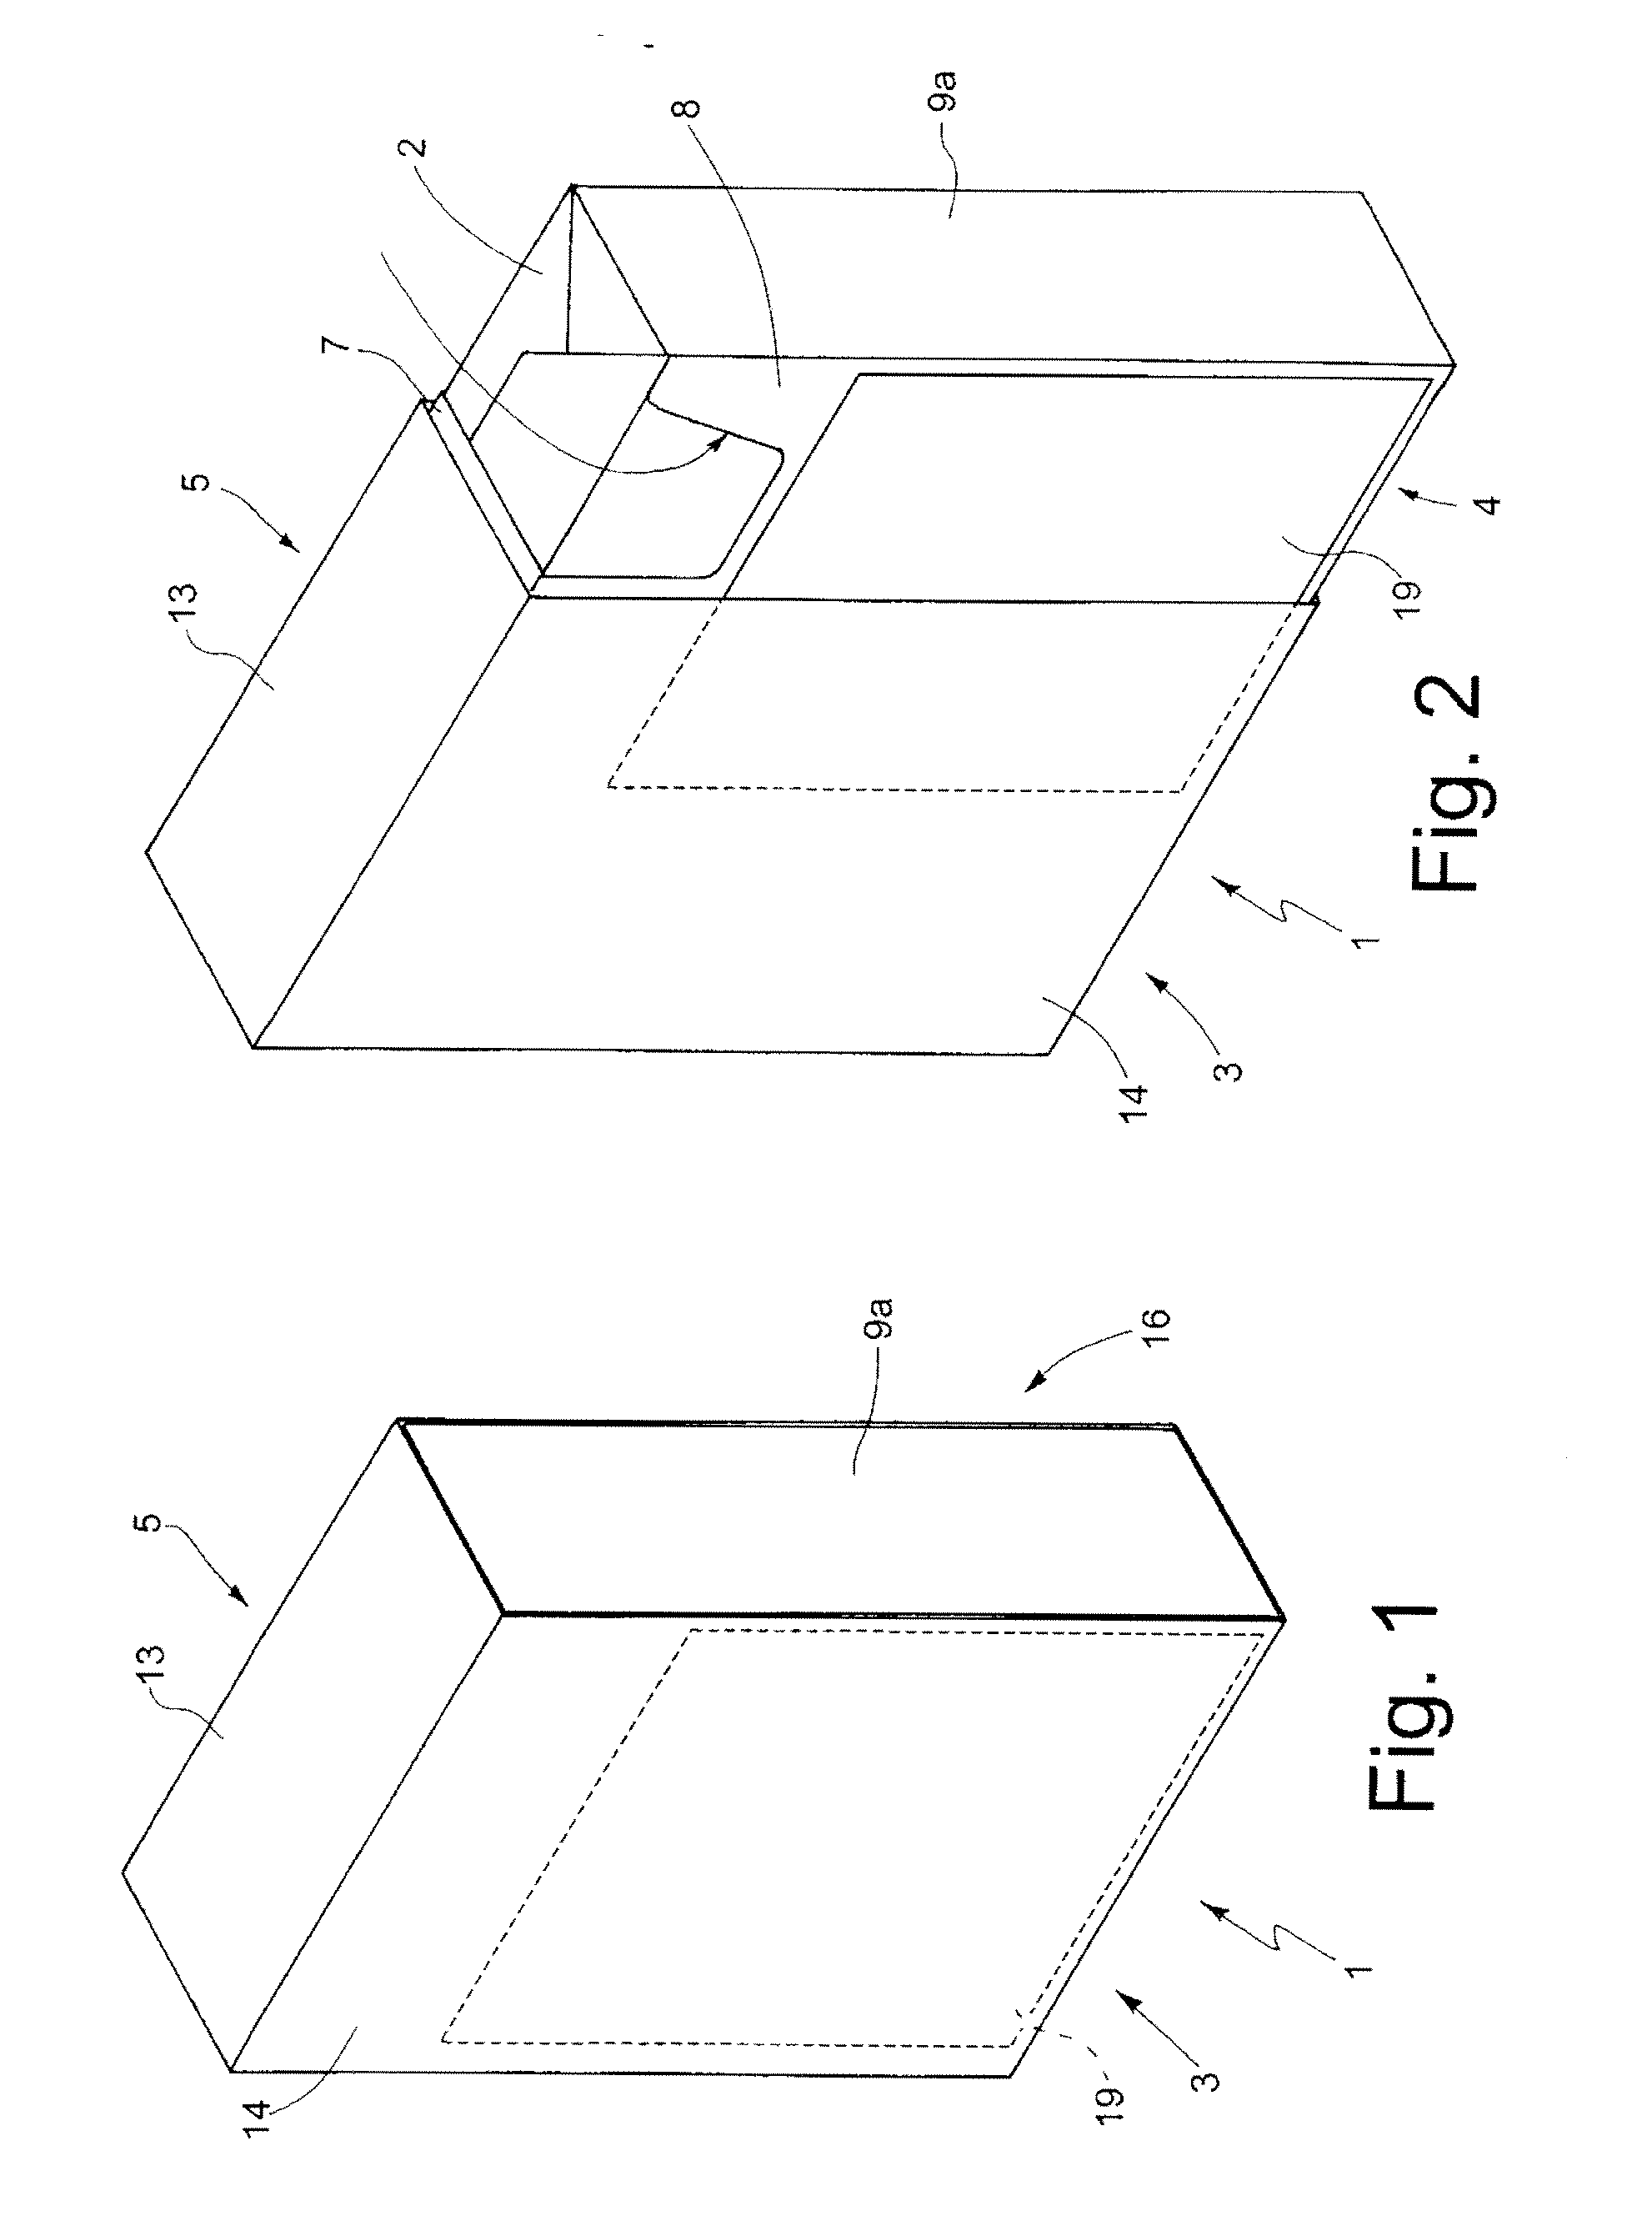 Slide-Open Package of Tobacco Articles, and Relative Production Method